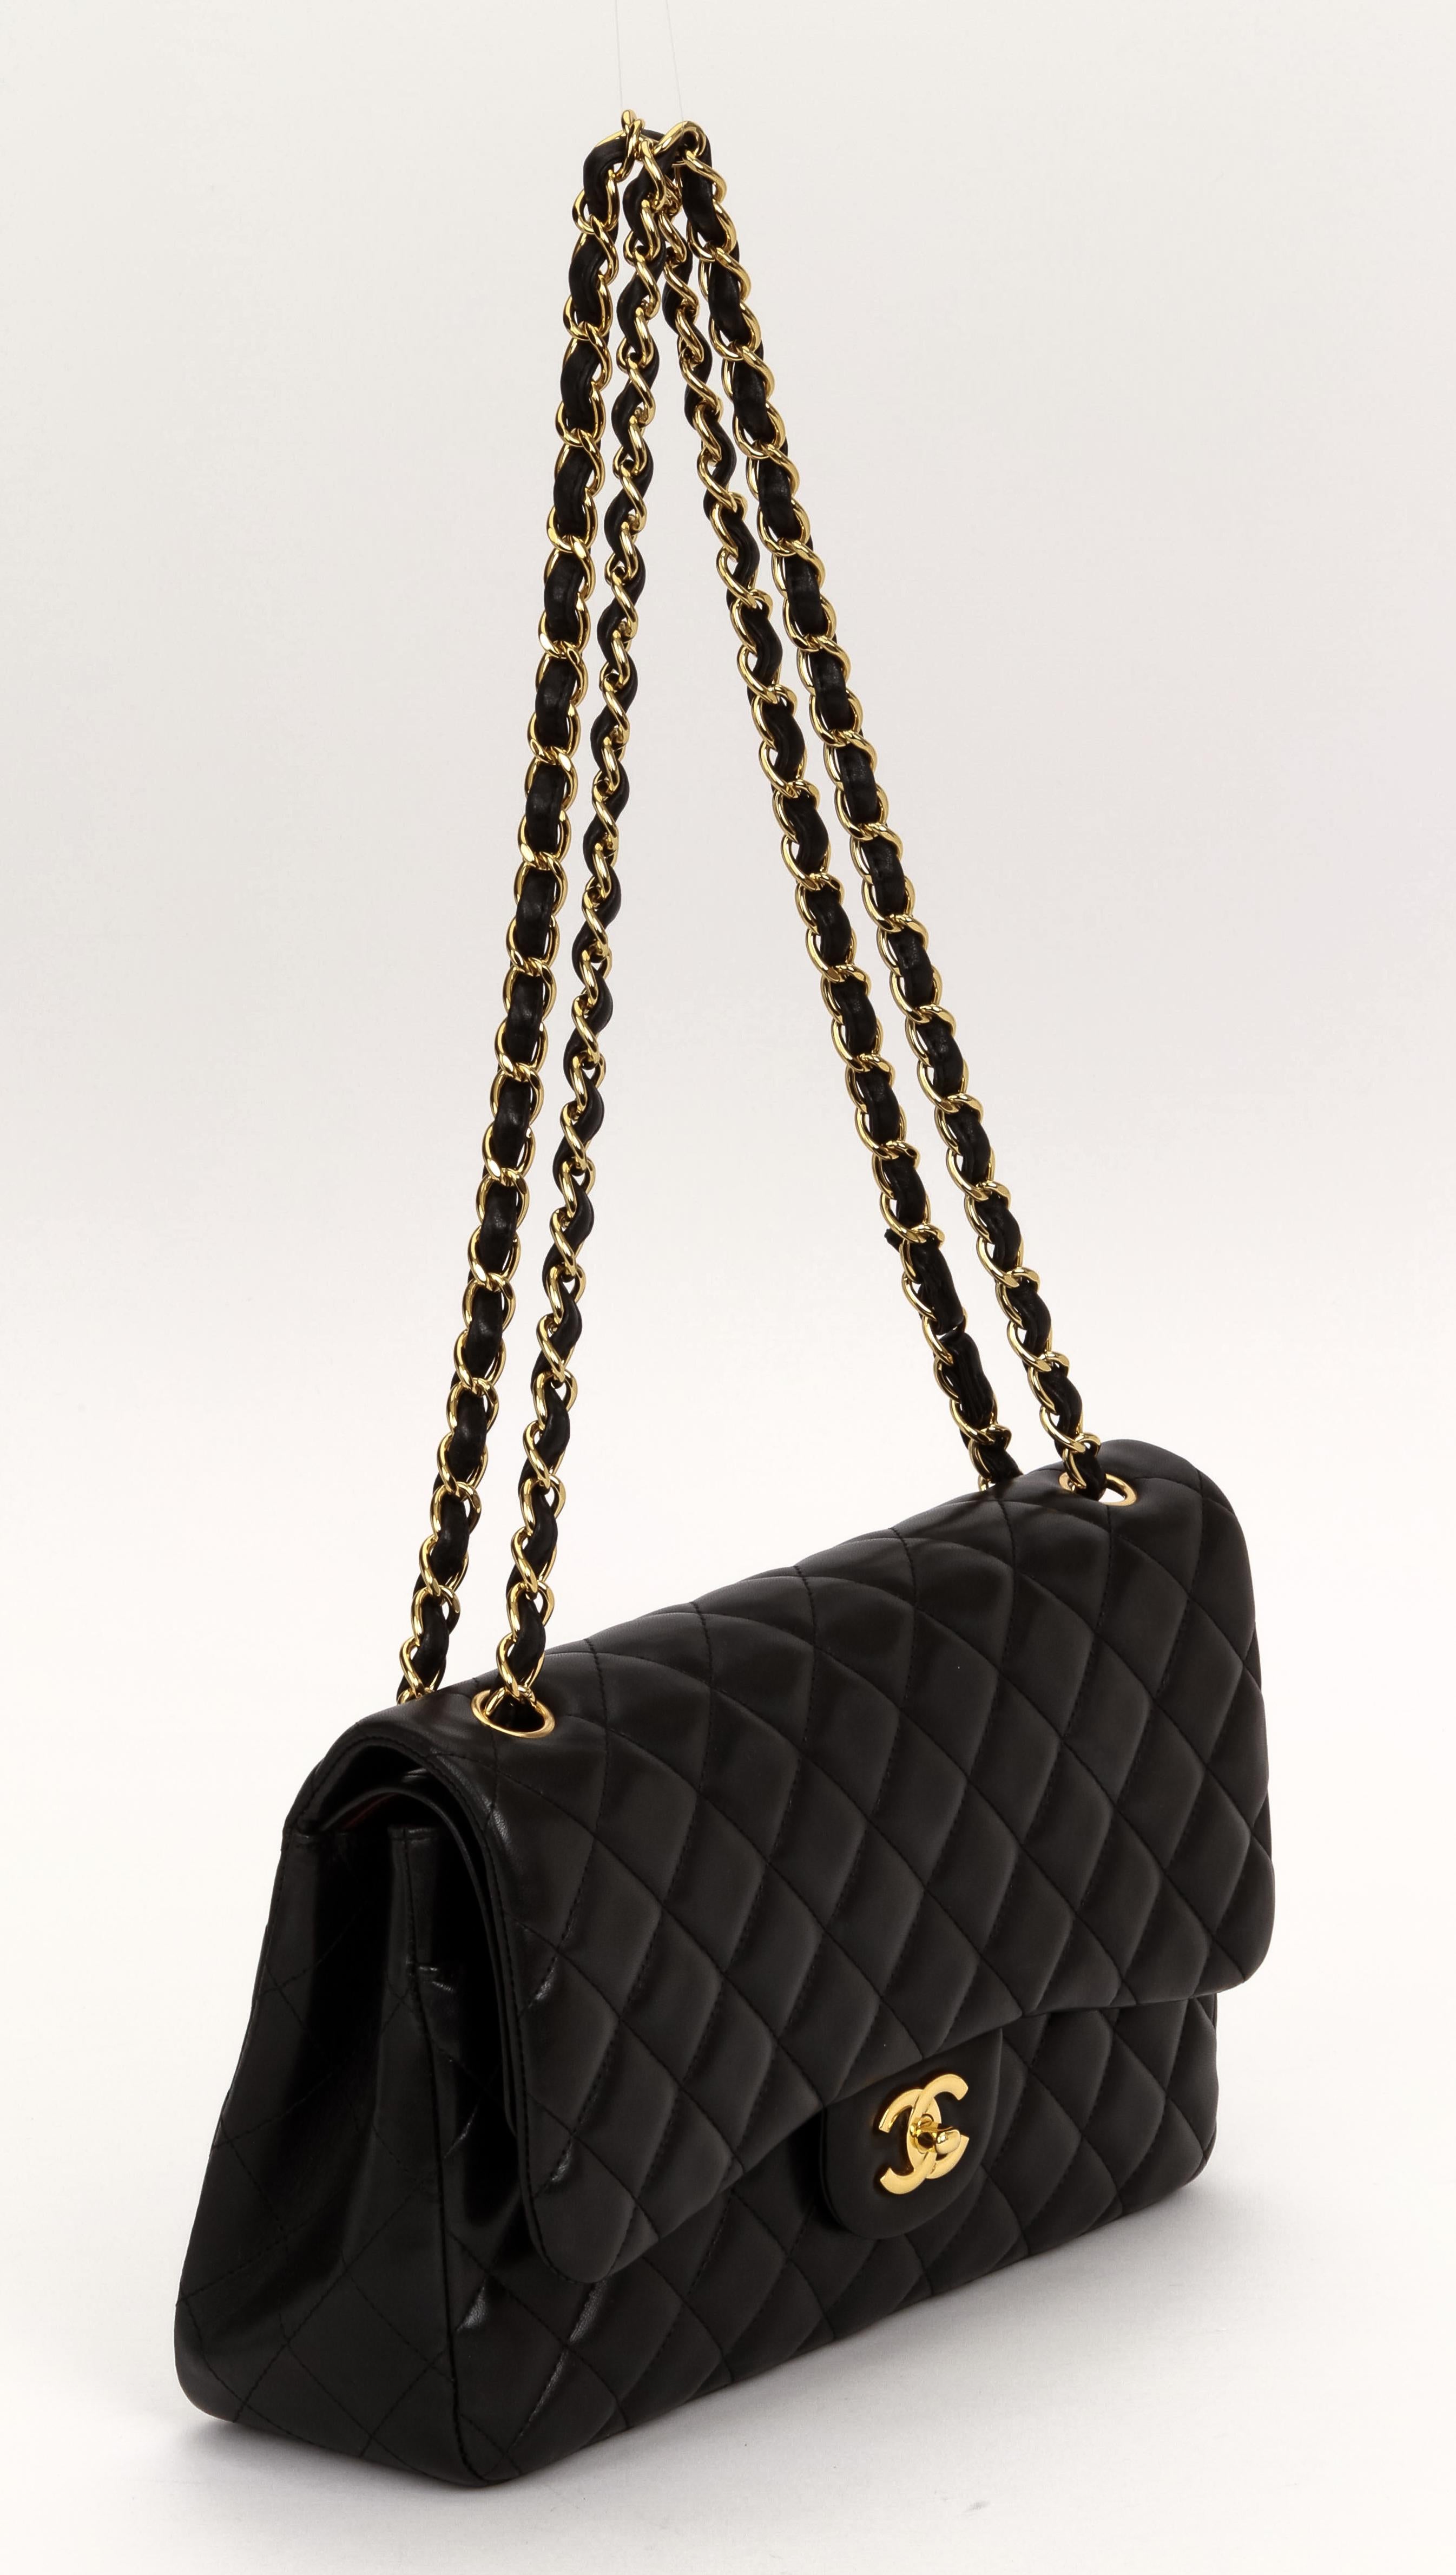 Chanel excellent condition black lambskin double flap with gold tone hardware. Shoulder drop 10